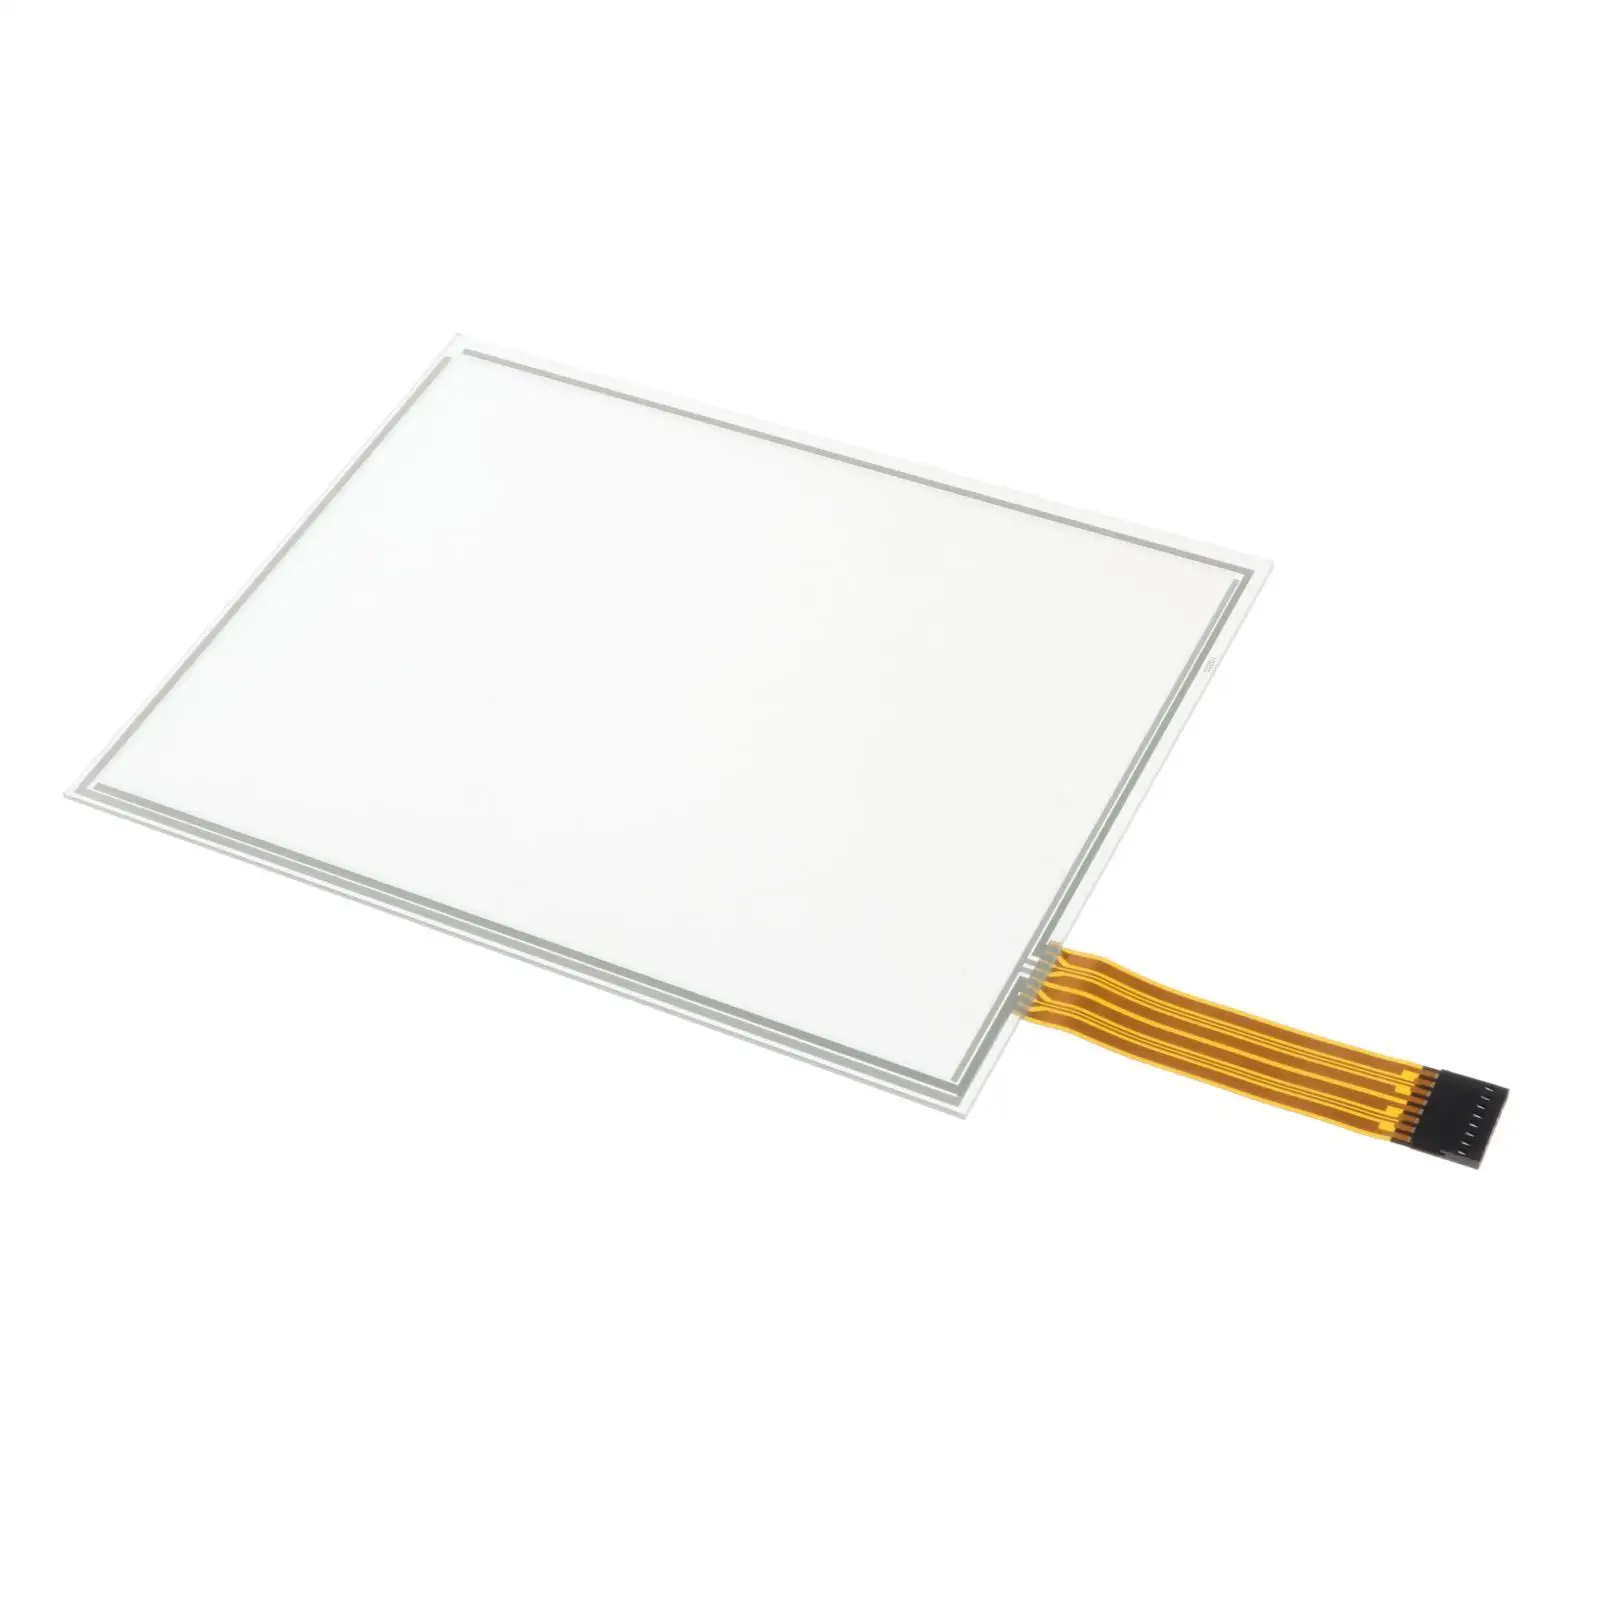 Touch Screen Digitizer PF80877 PG200402 PF81076 PF81185 10.4inch for Greenstar GS2 2600 Computer Display Stable Performance